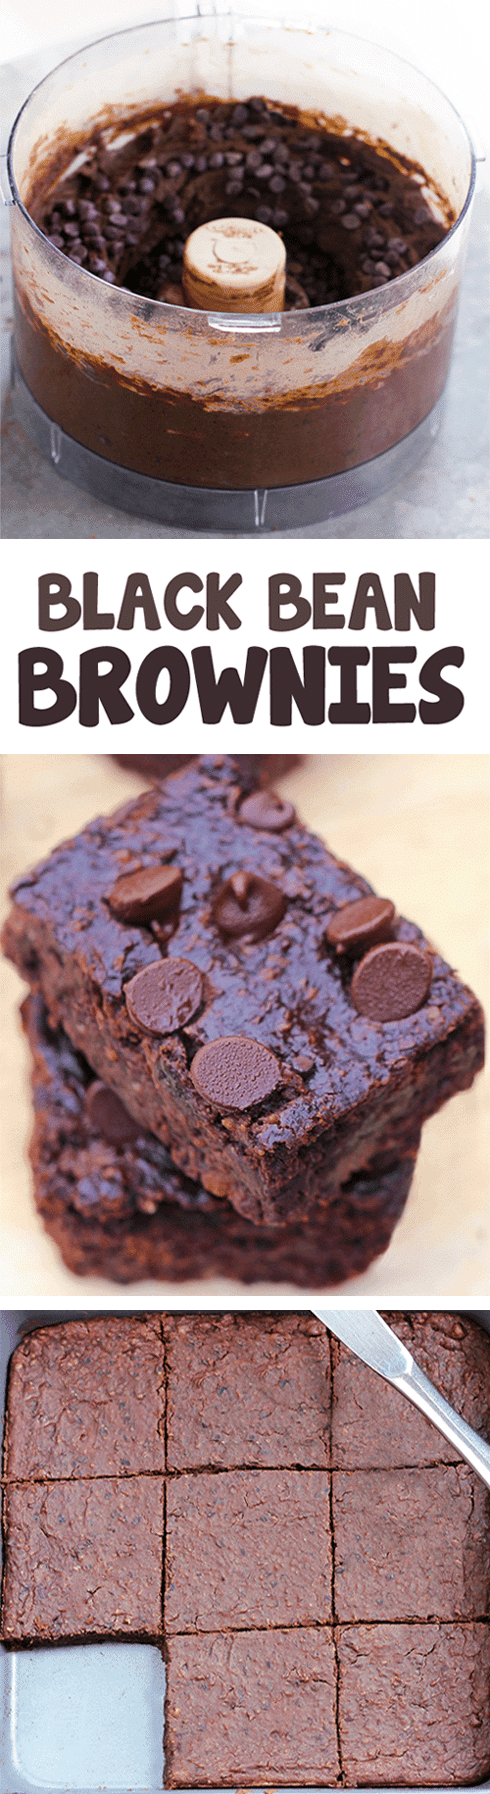 The Best Black Bean Brownies Recipe From Scratch